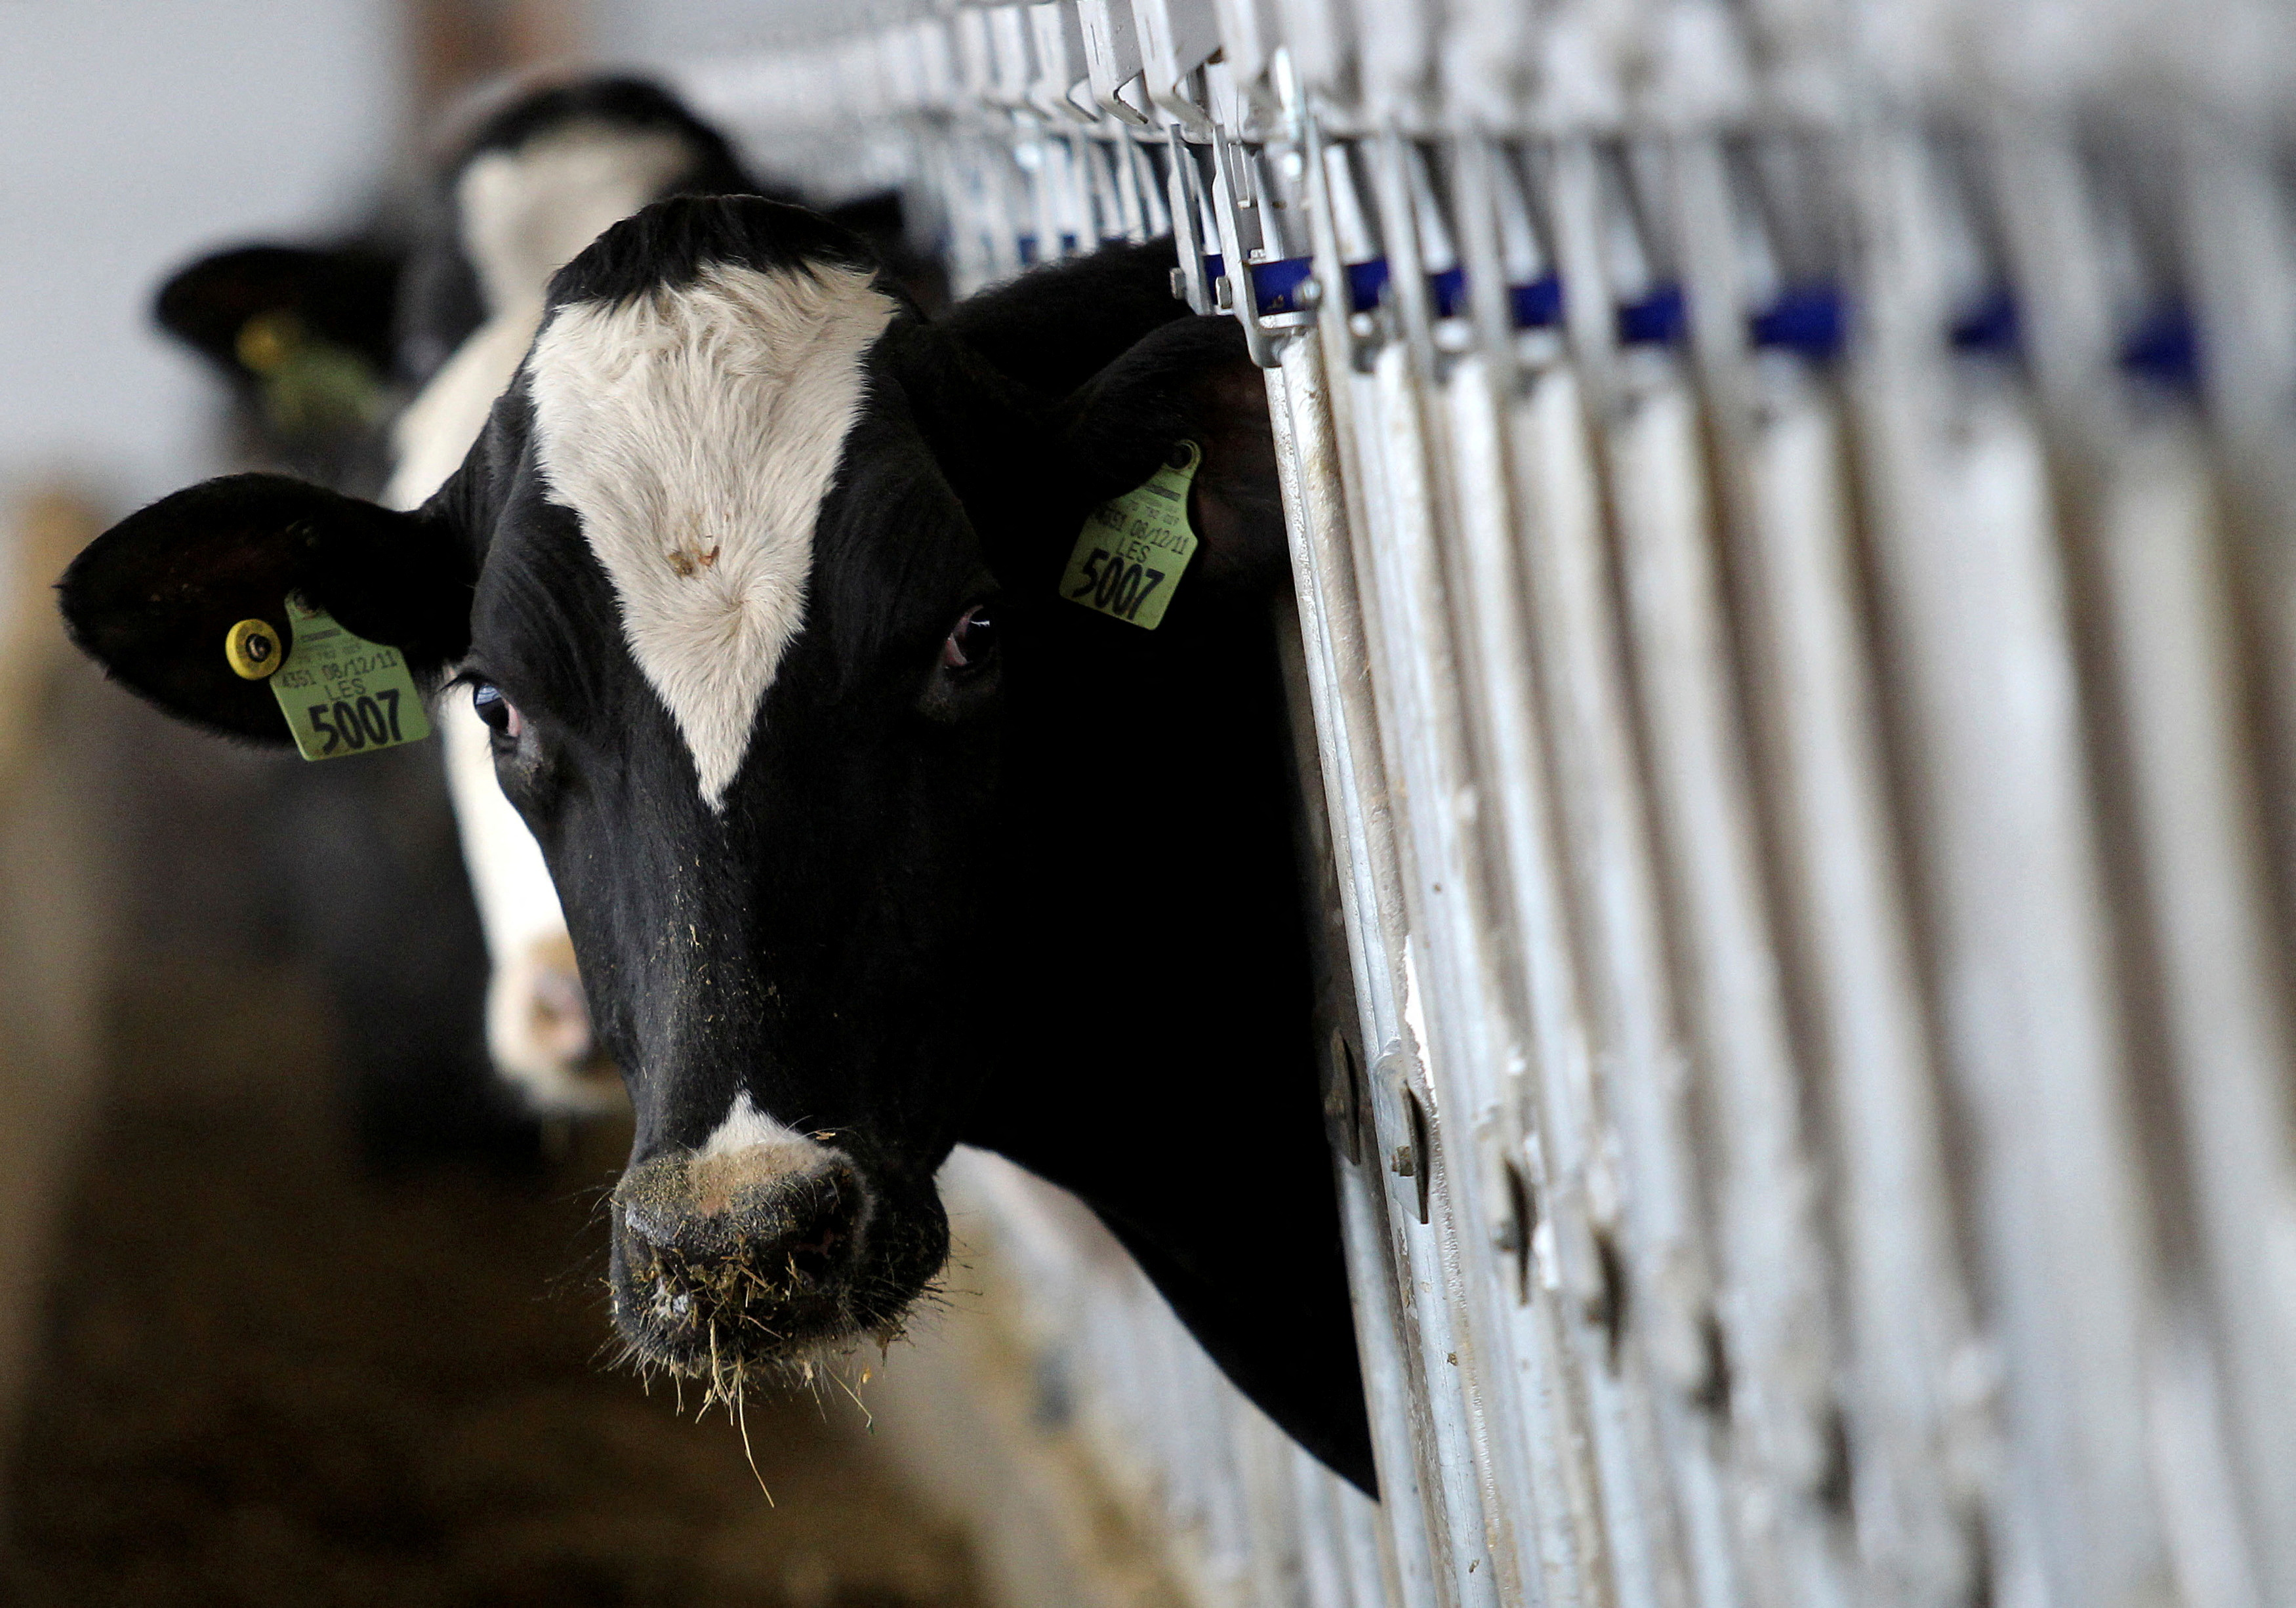 A dairy cow stops to look up while feeding at a dairy farm in Ashland